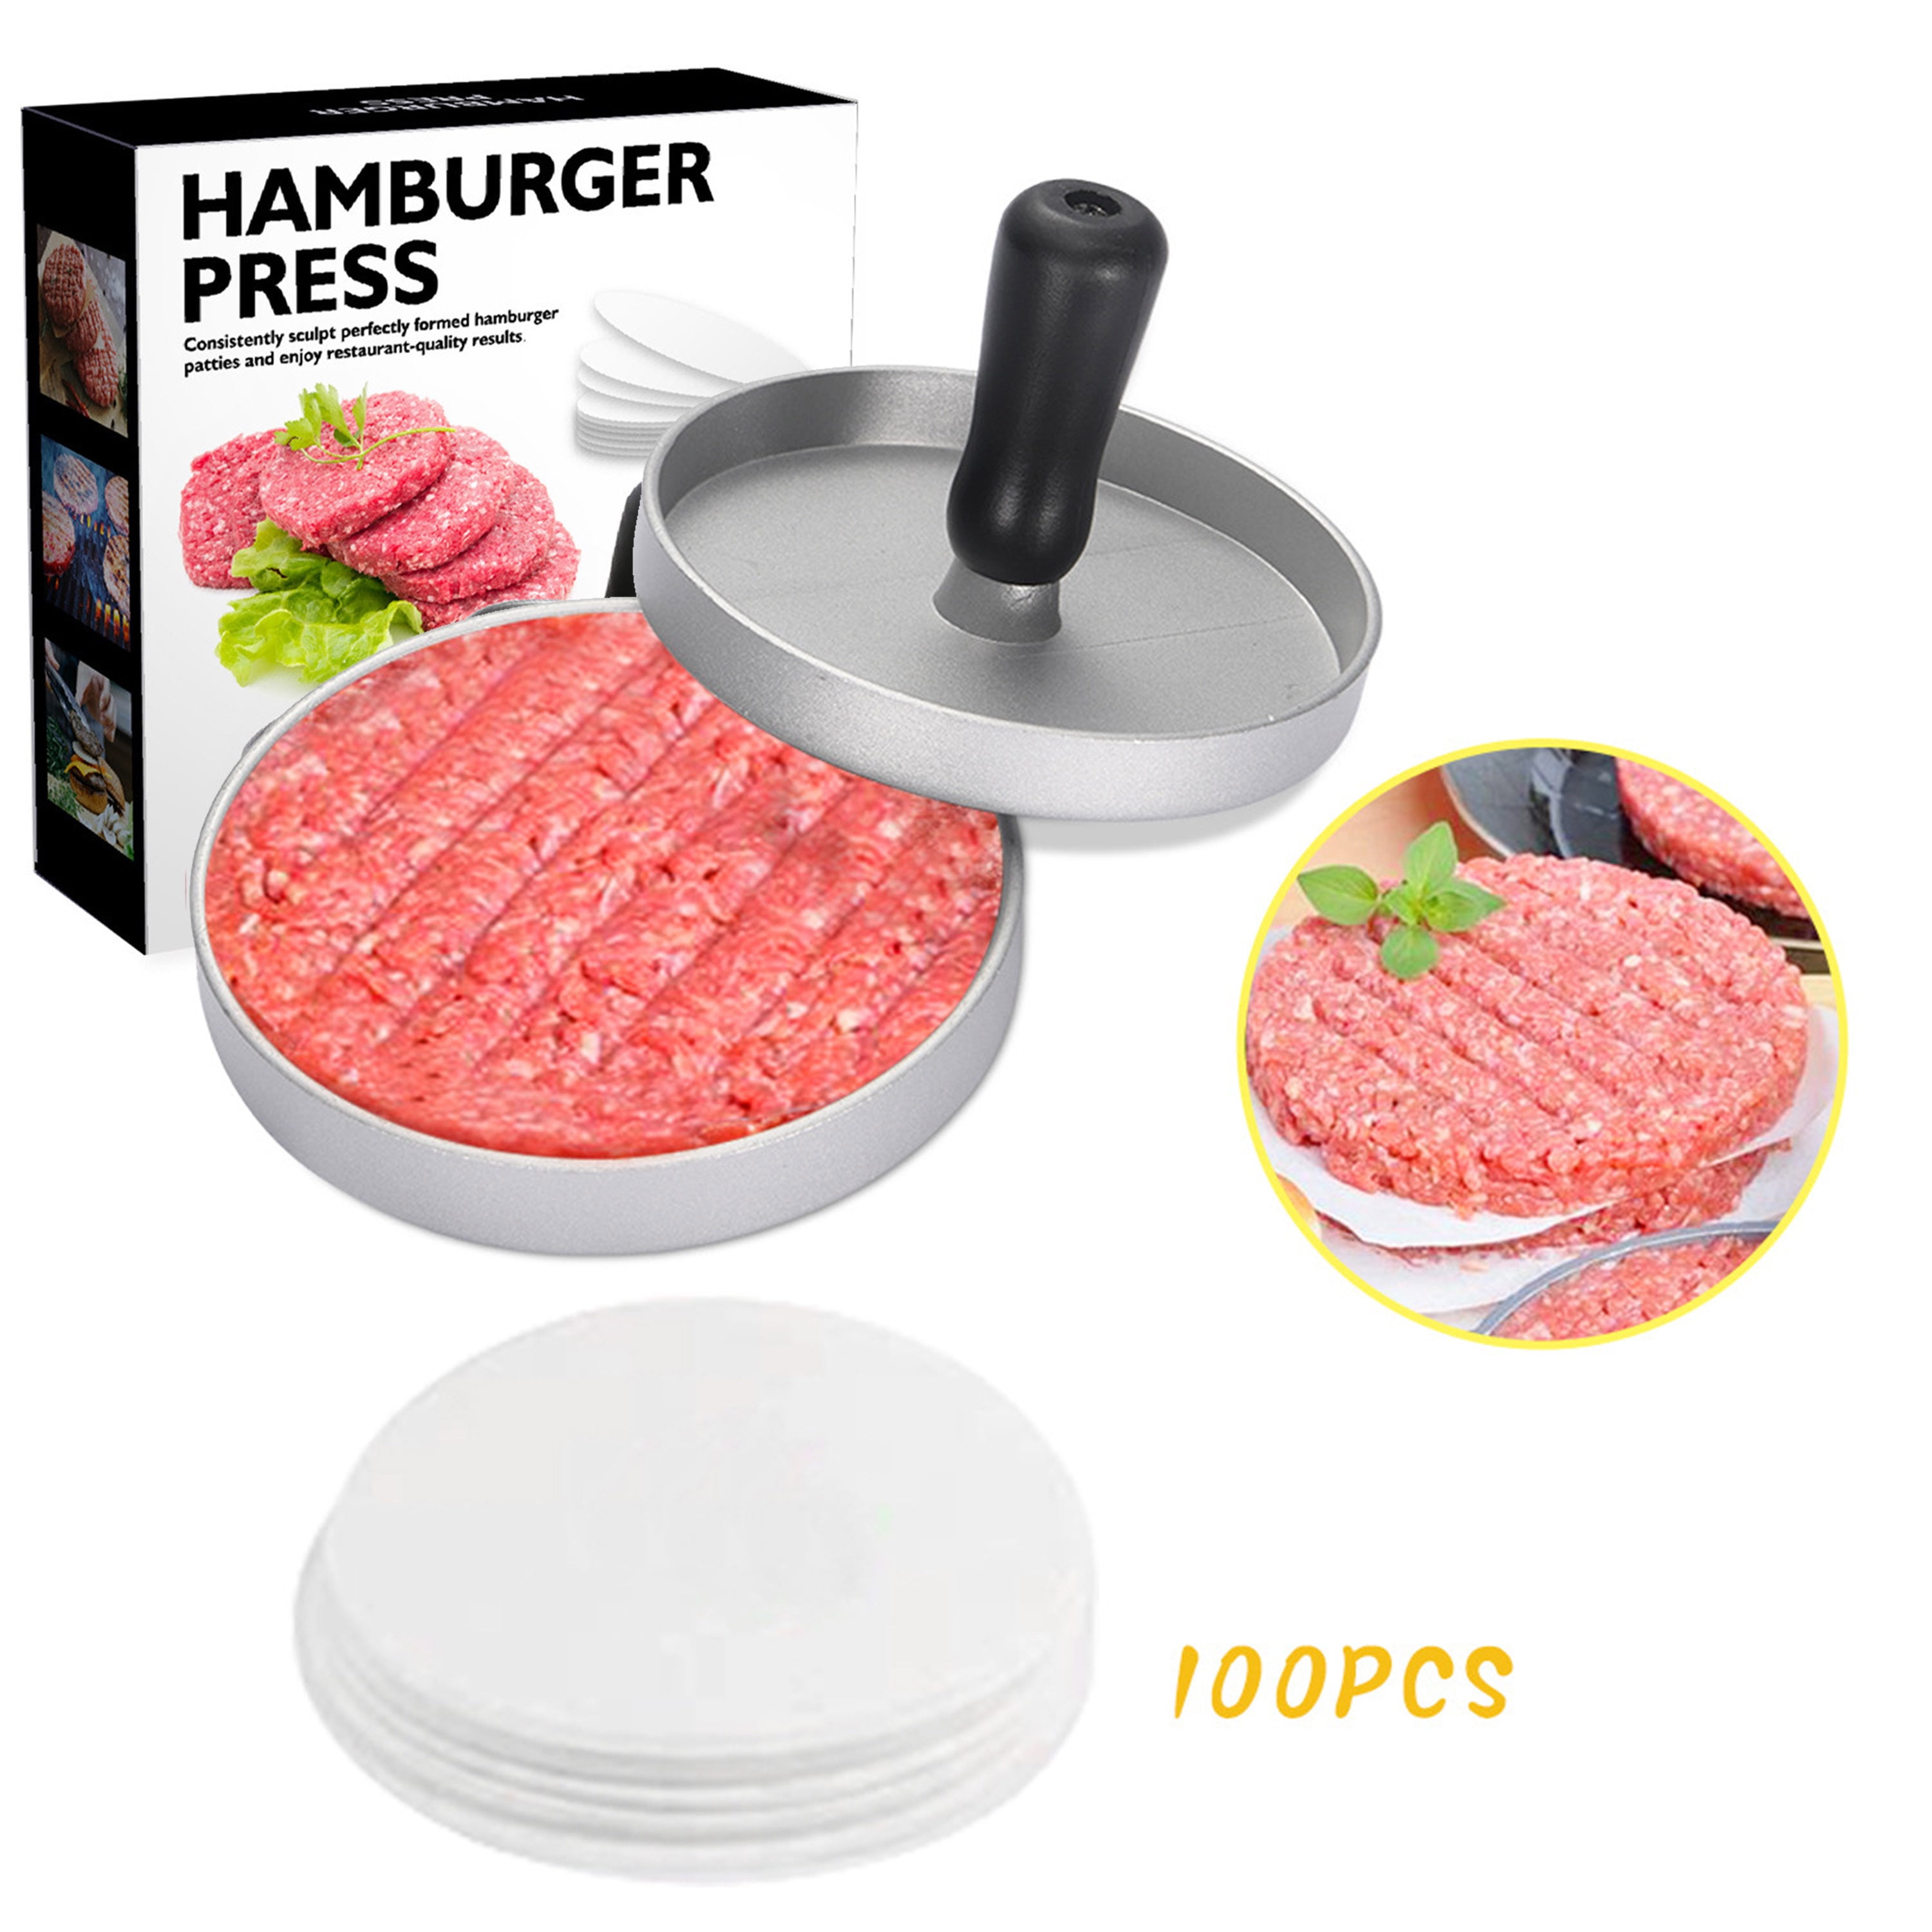 Sweet Home Burger Press Patty Maker,7-in-1 Innovative Burger Press,Hamburger Maker Mould Machine,Non Stick Burger Press Patty Maker,Frozen Hamburger Press Patty Maker,Red 